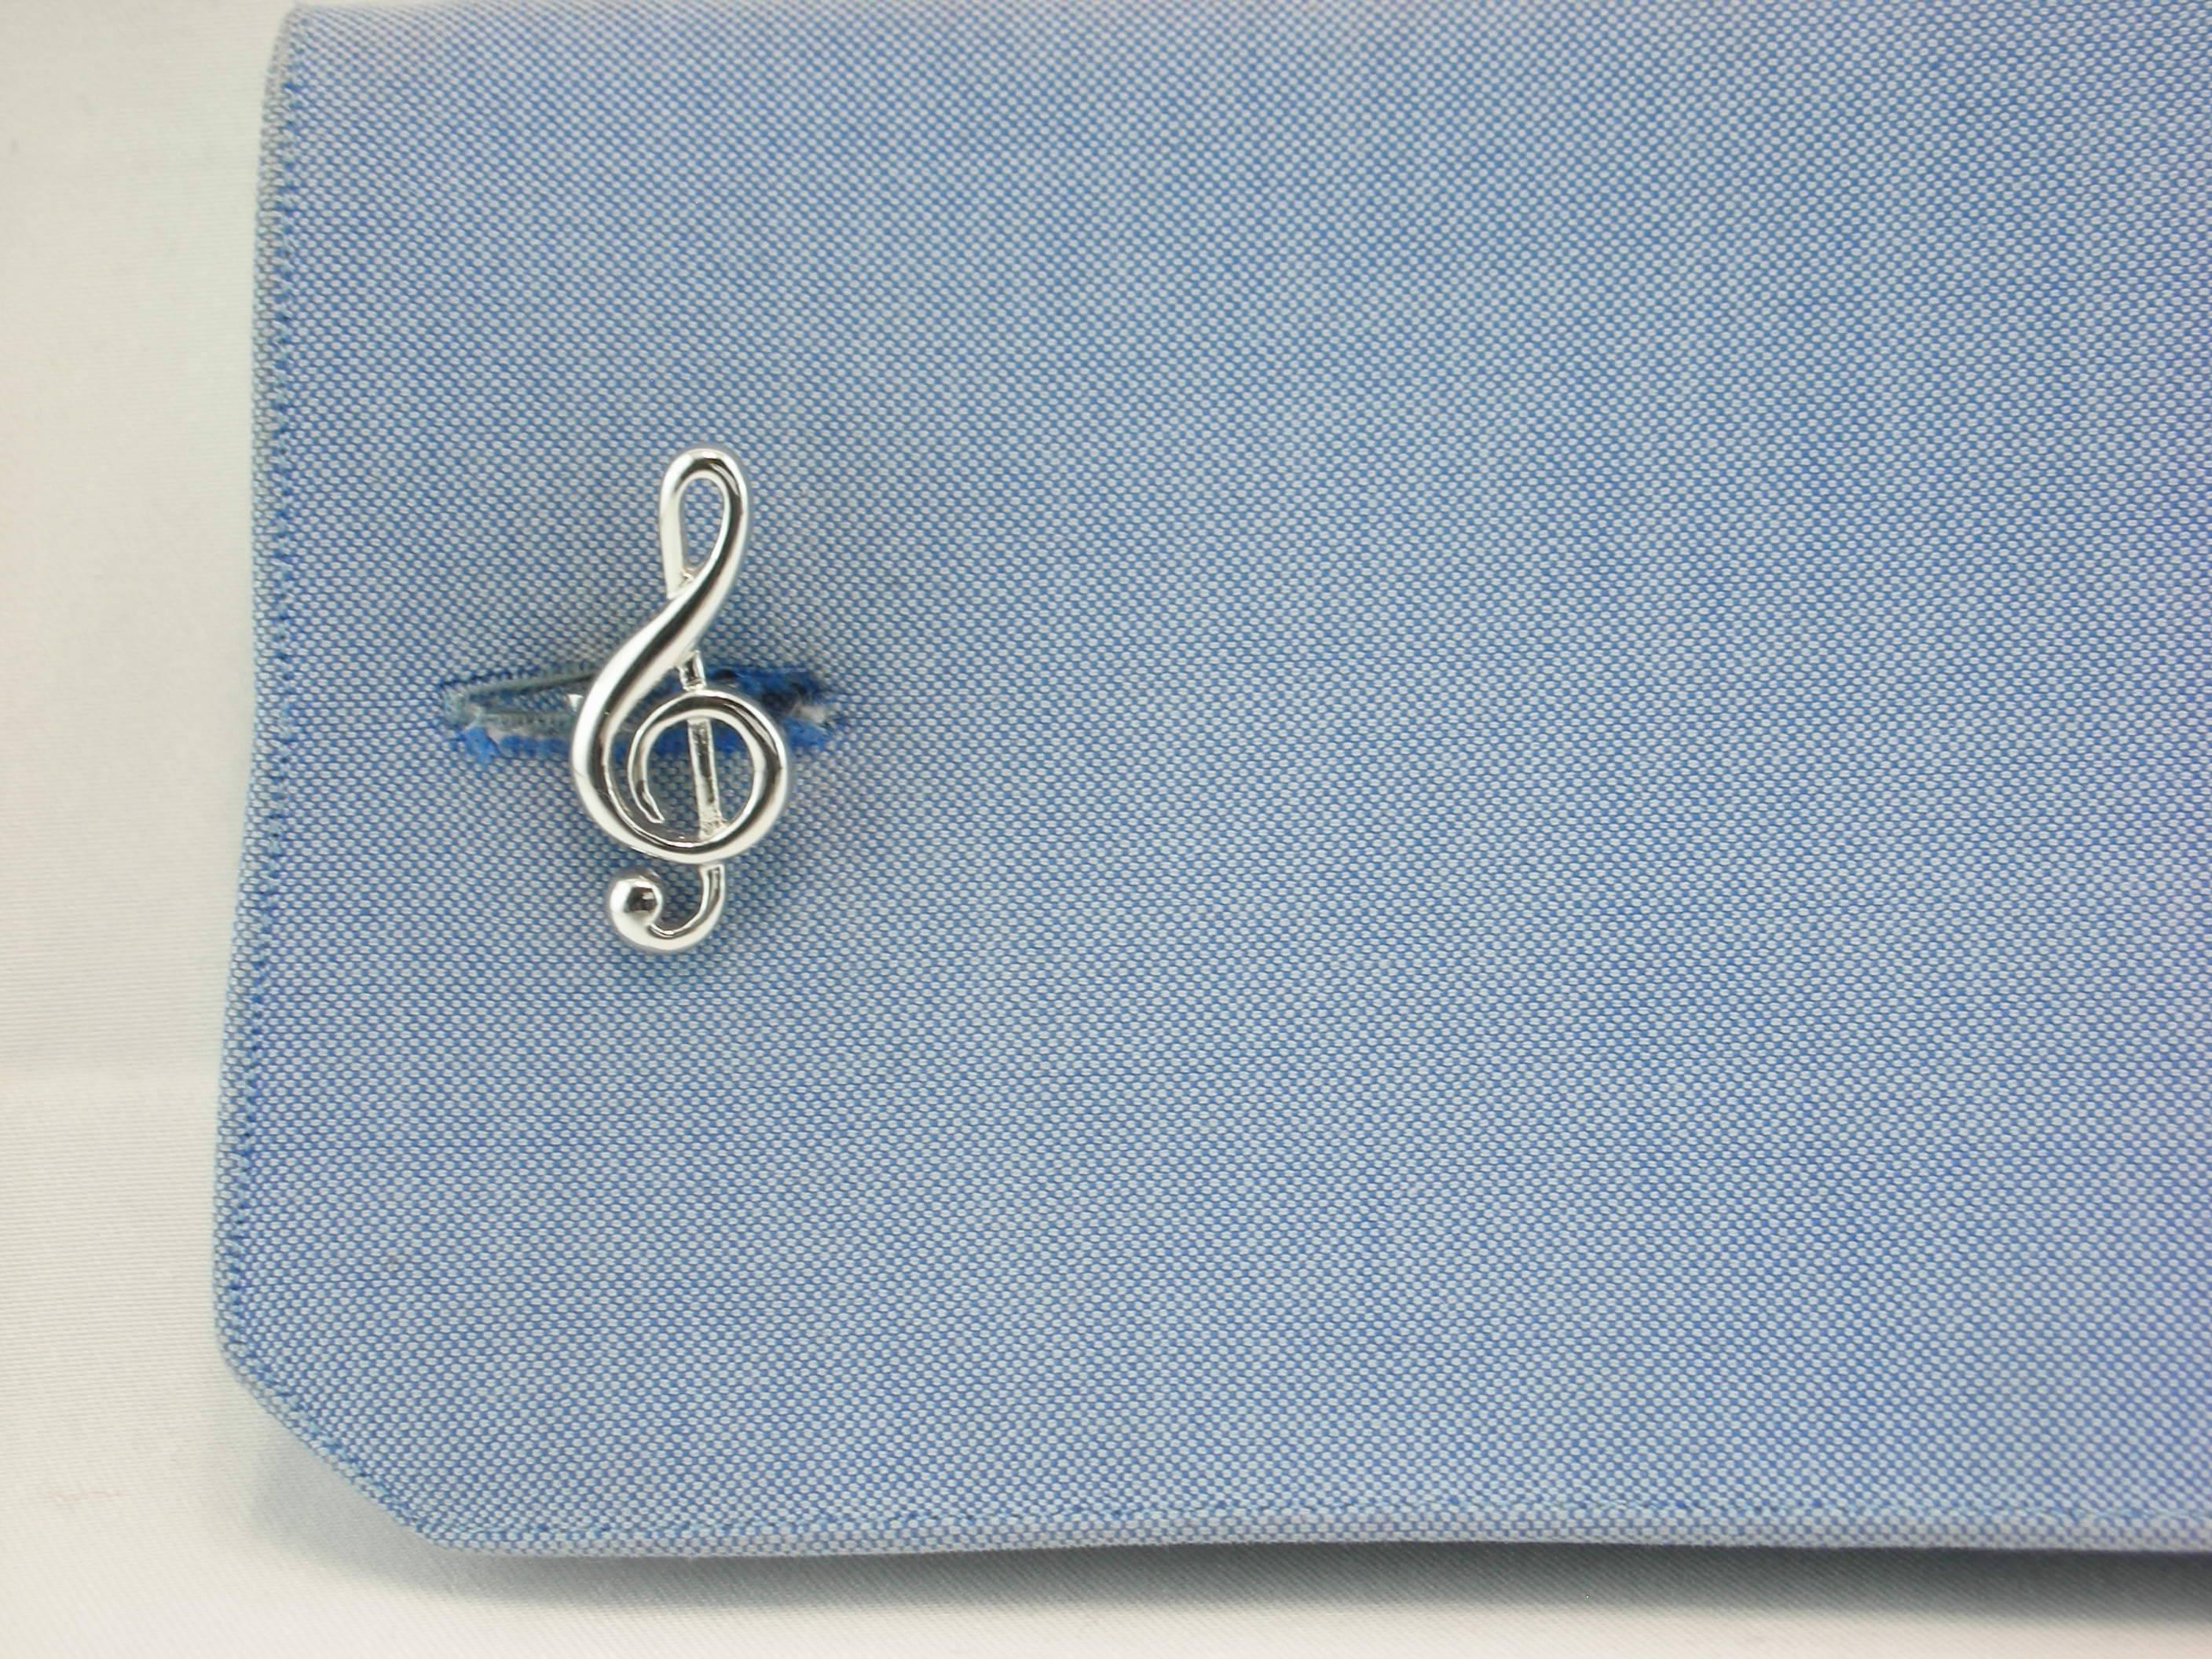 Jona design collection, hand crafted in Italy, Sterling silver music key cufflinks. Marked JONA 925.   

All Jona jewelry is new and has never been previously owned or worn. Each item will arrive at your door beautifully gift wrapped in Jona boxes,